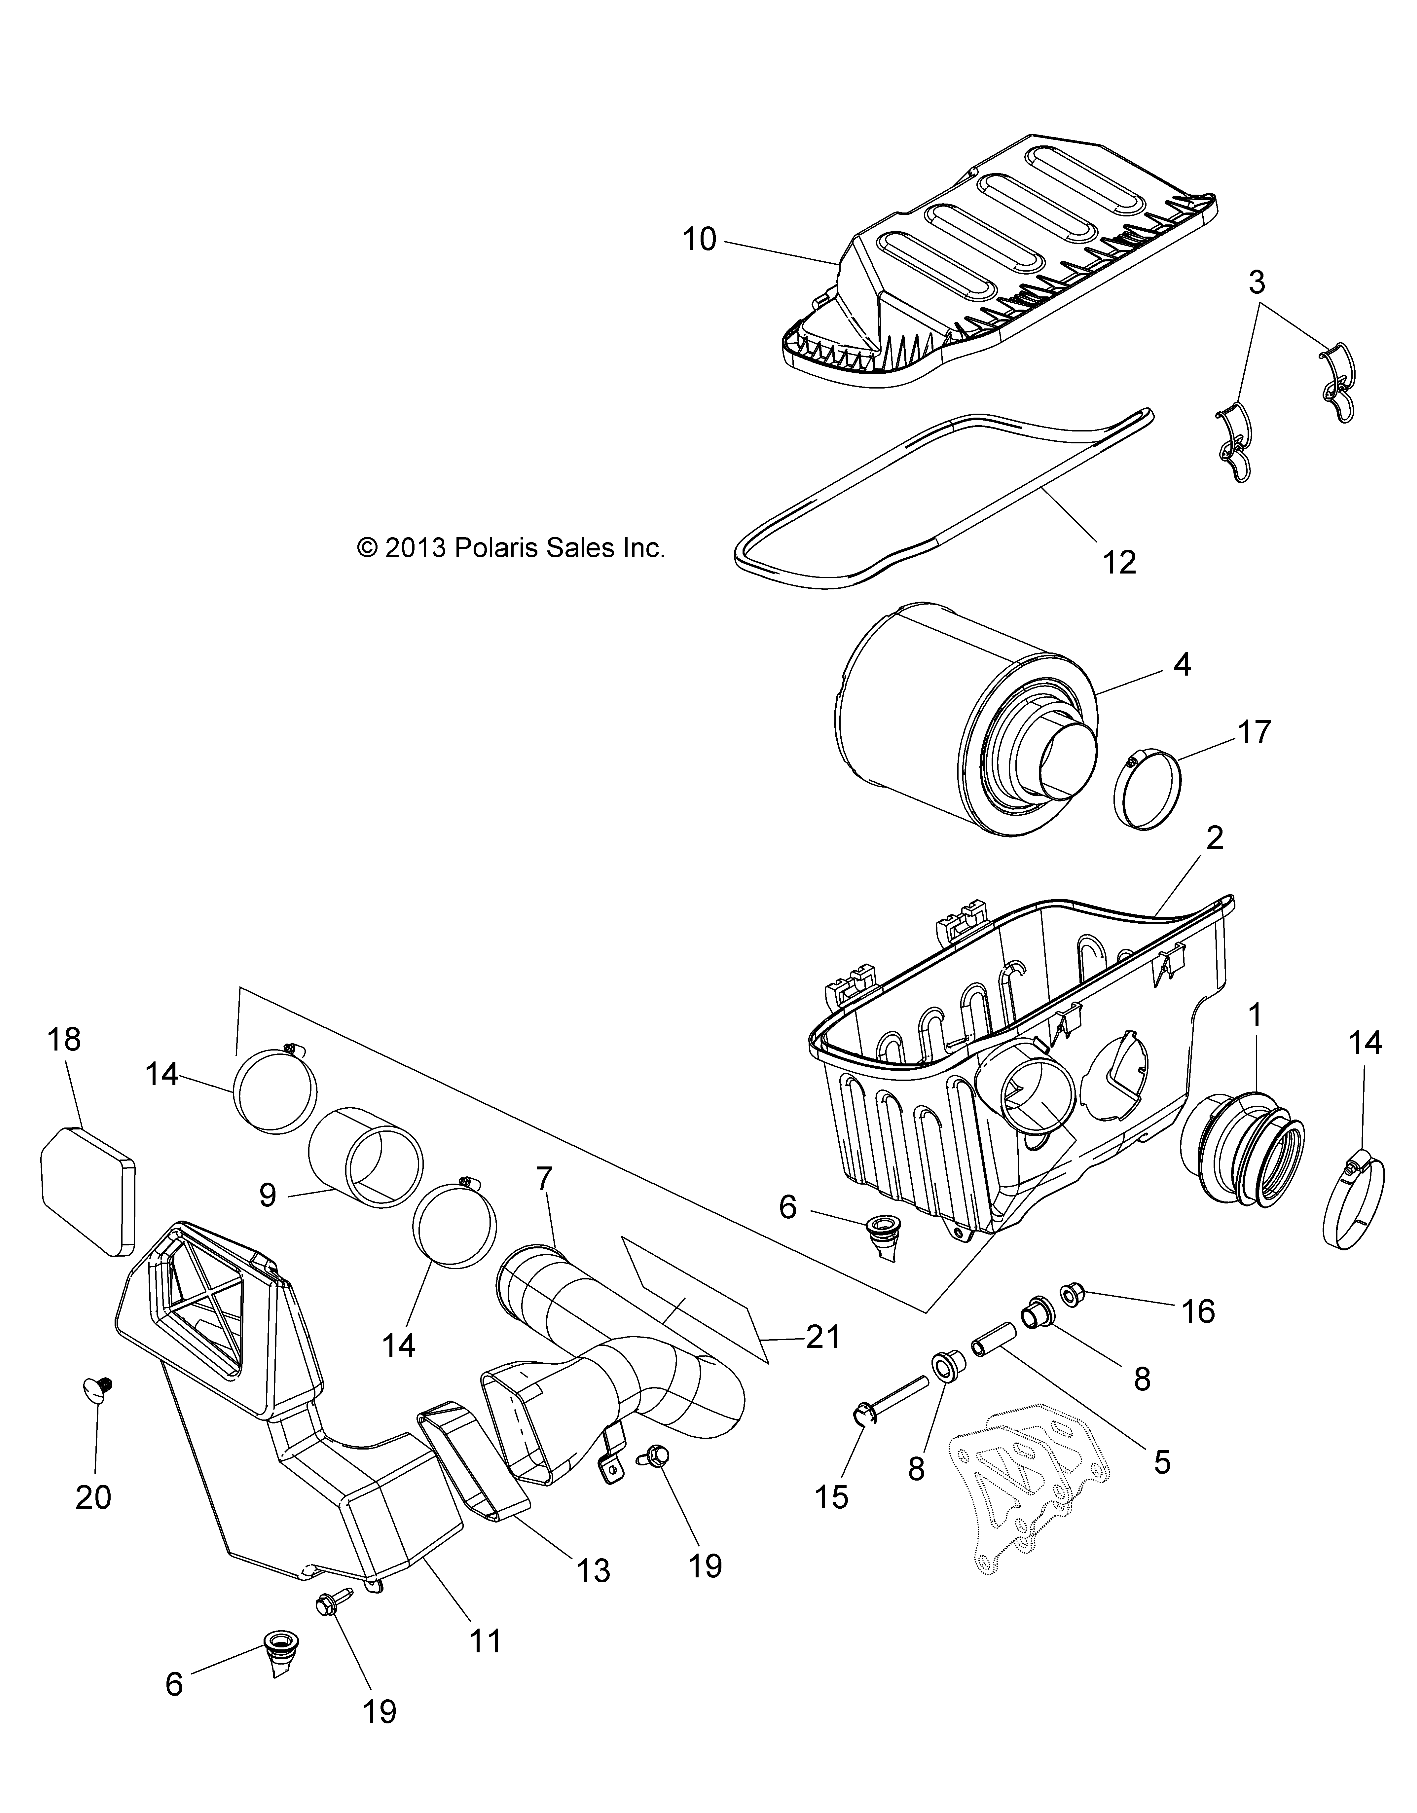 Part Number : 5414742 BOOT-ENGINE INTAKE